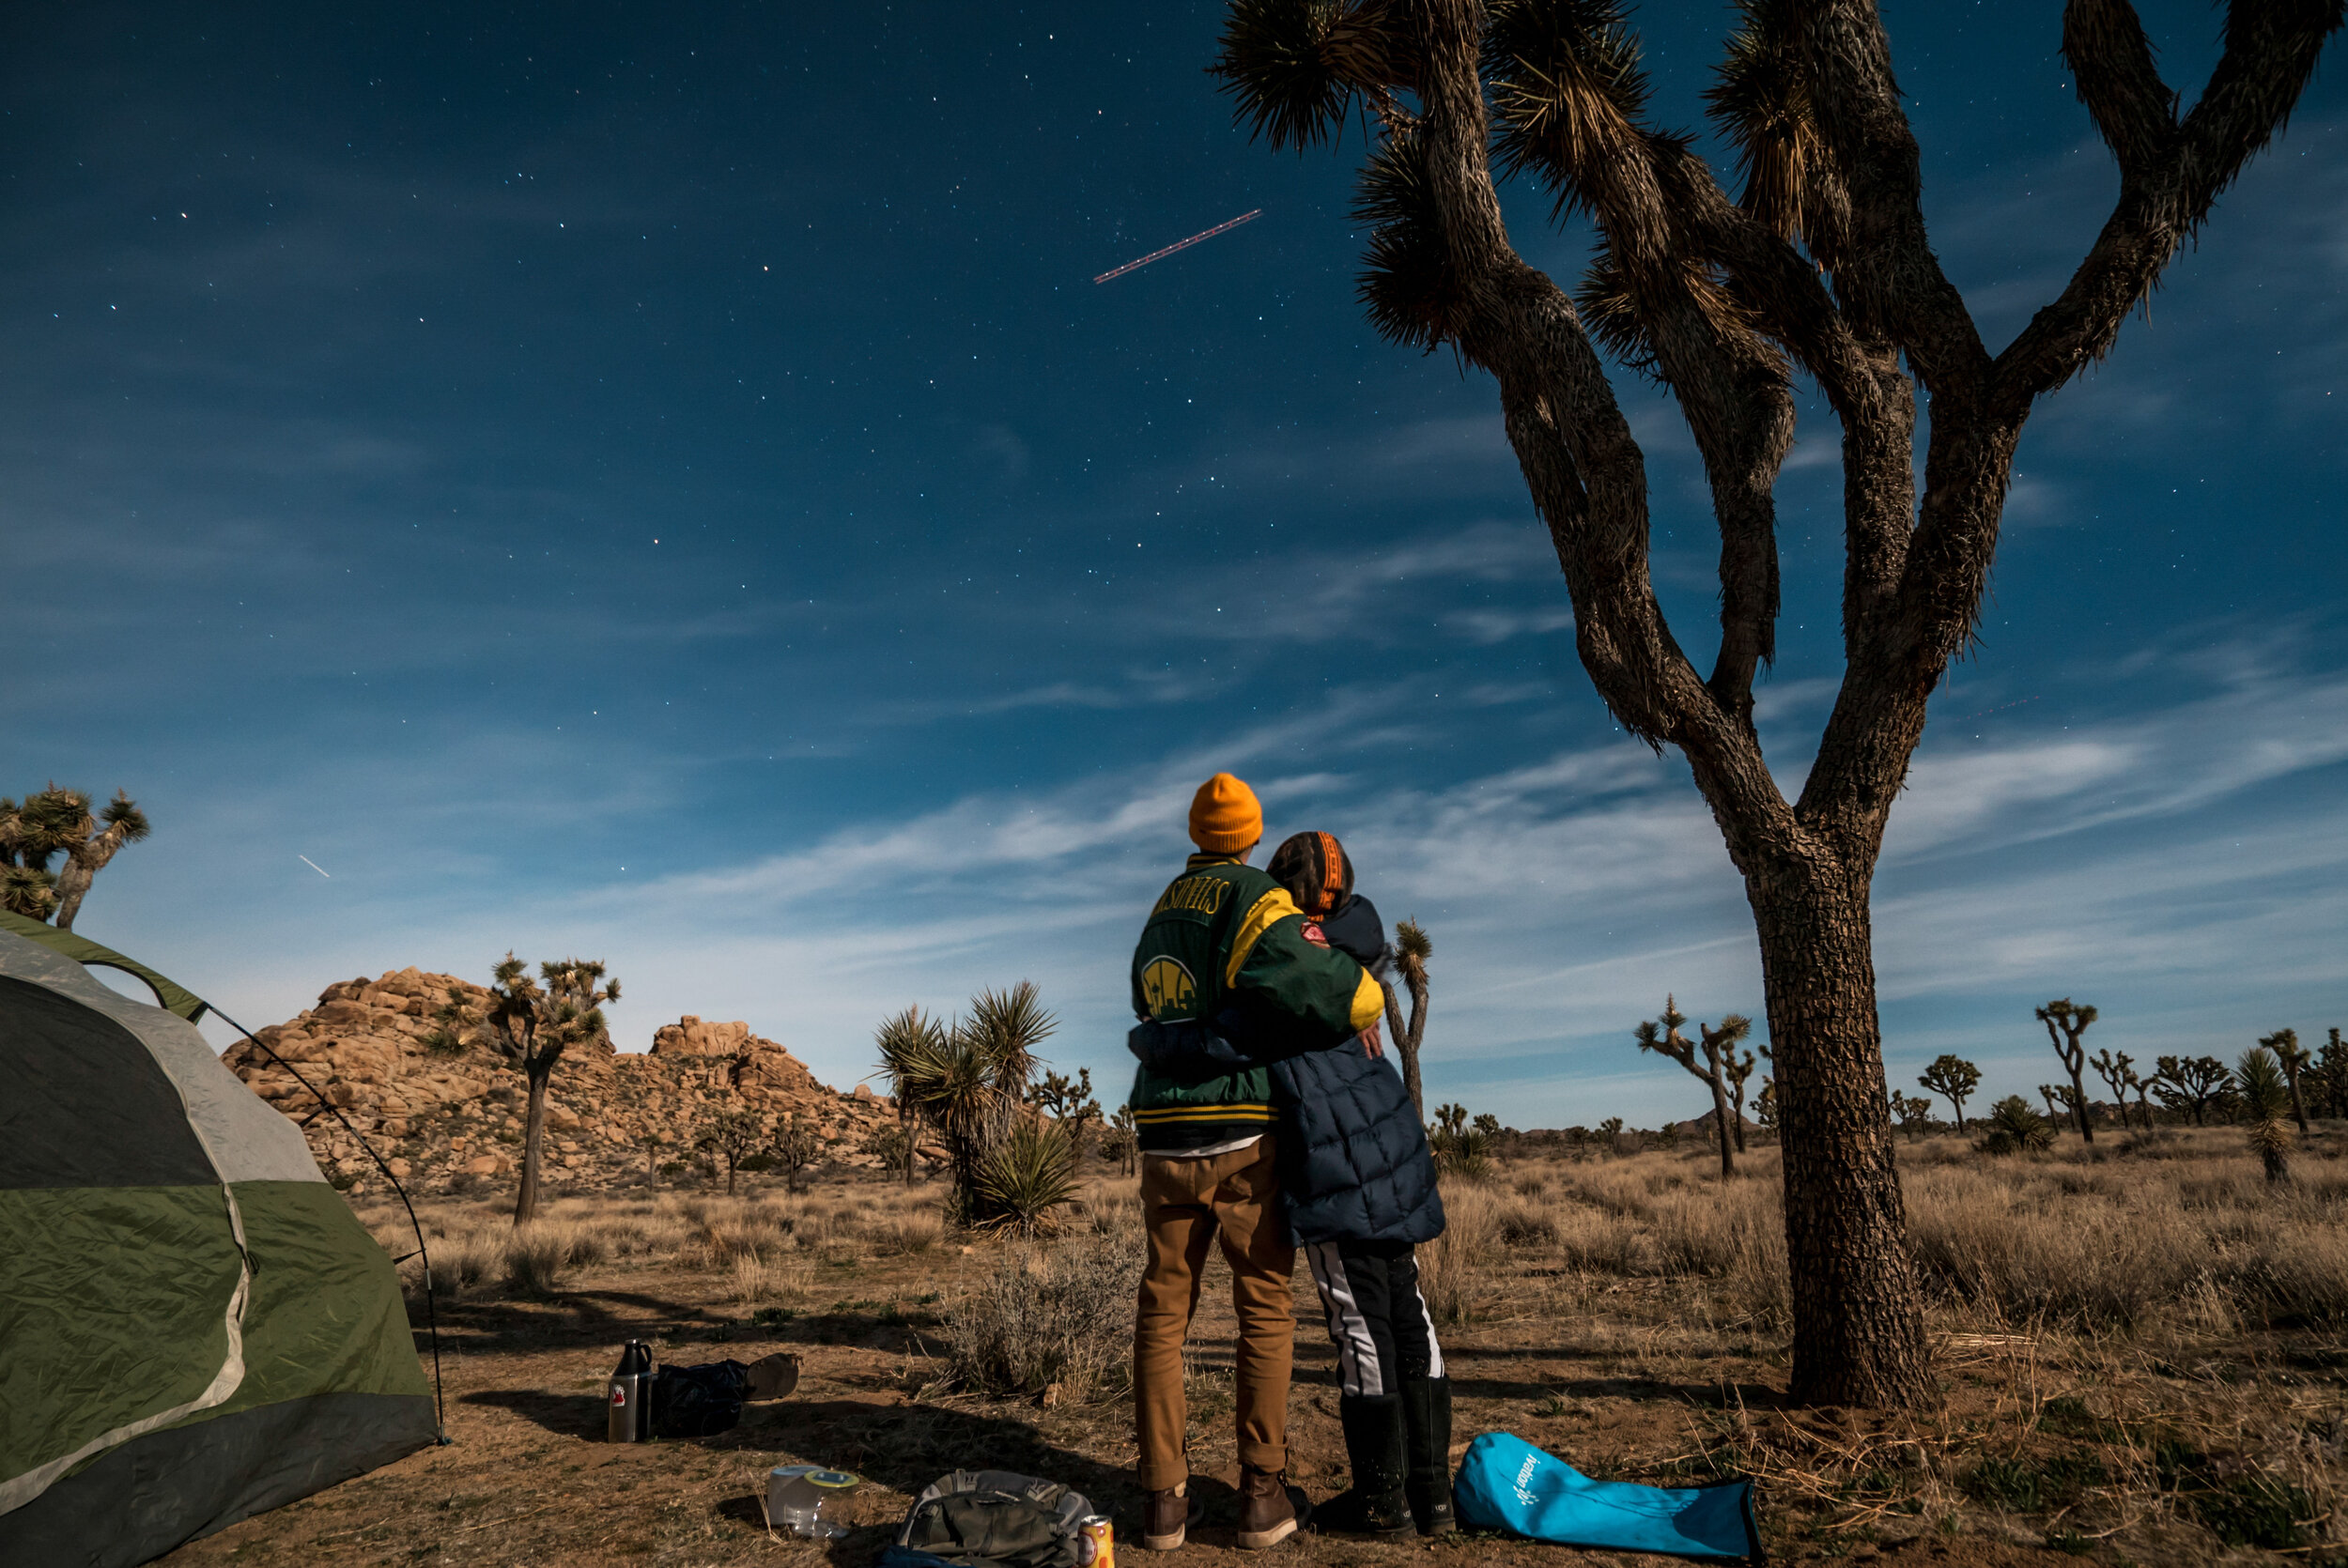 The lack of distraction from camping allowed us to learn so much about one another. We probably explored who we were as people more than we explored Joshua Tree itself.